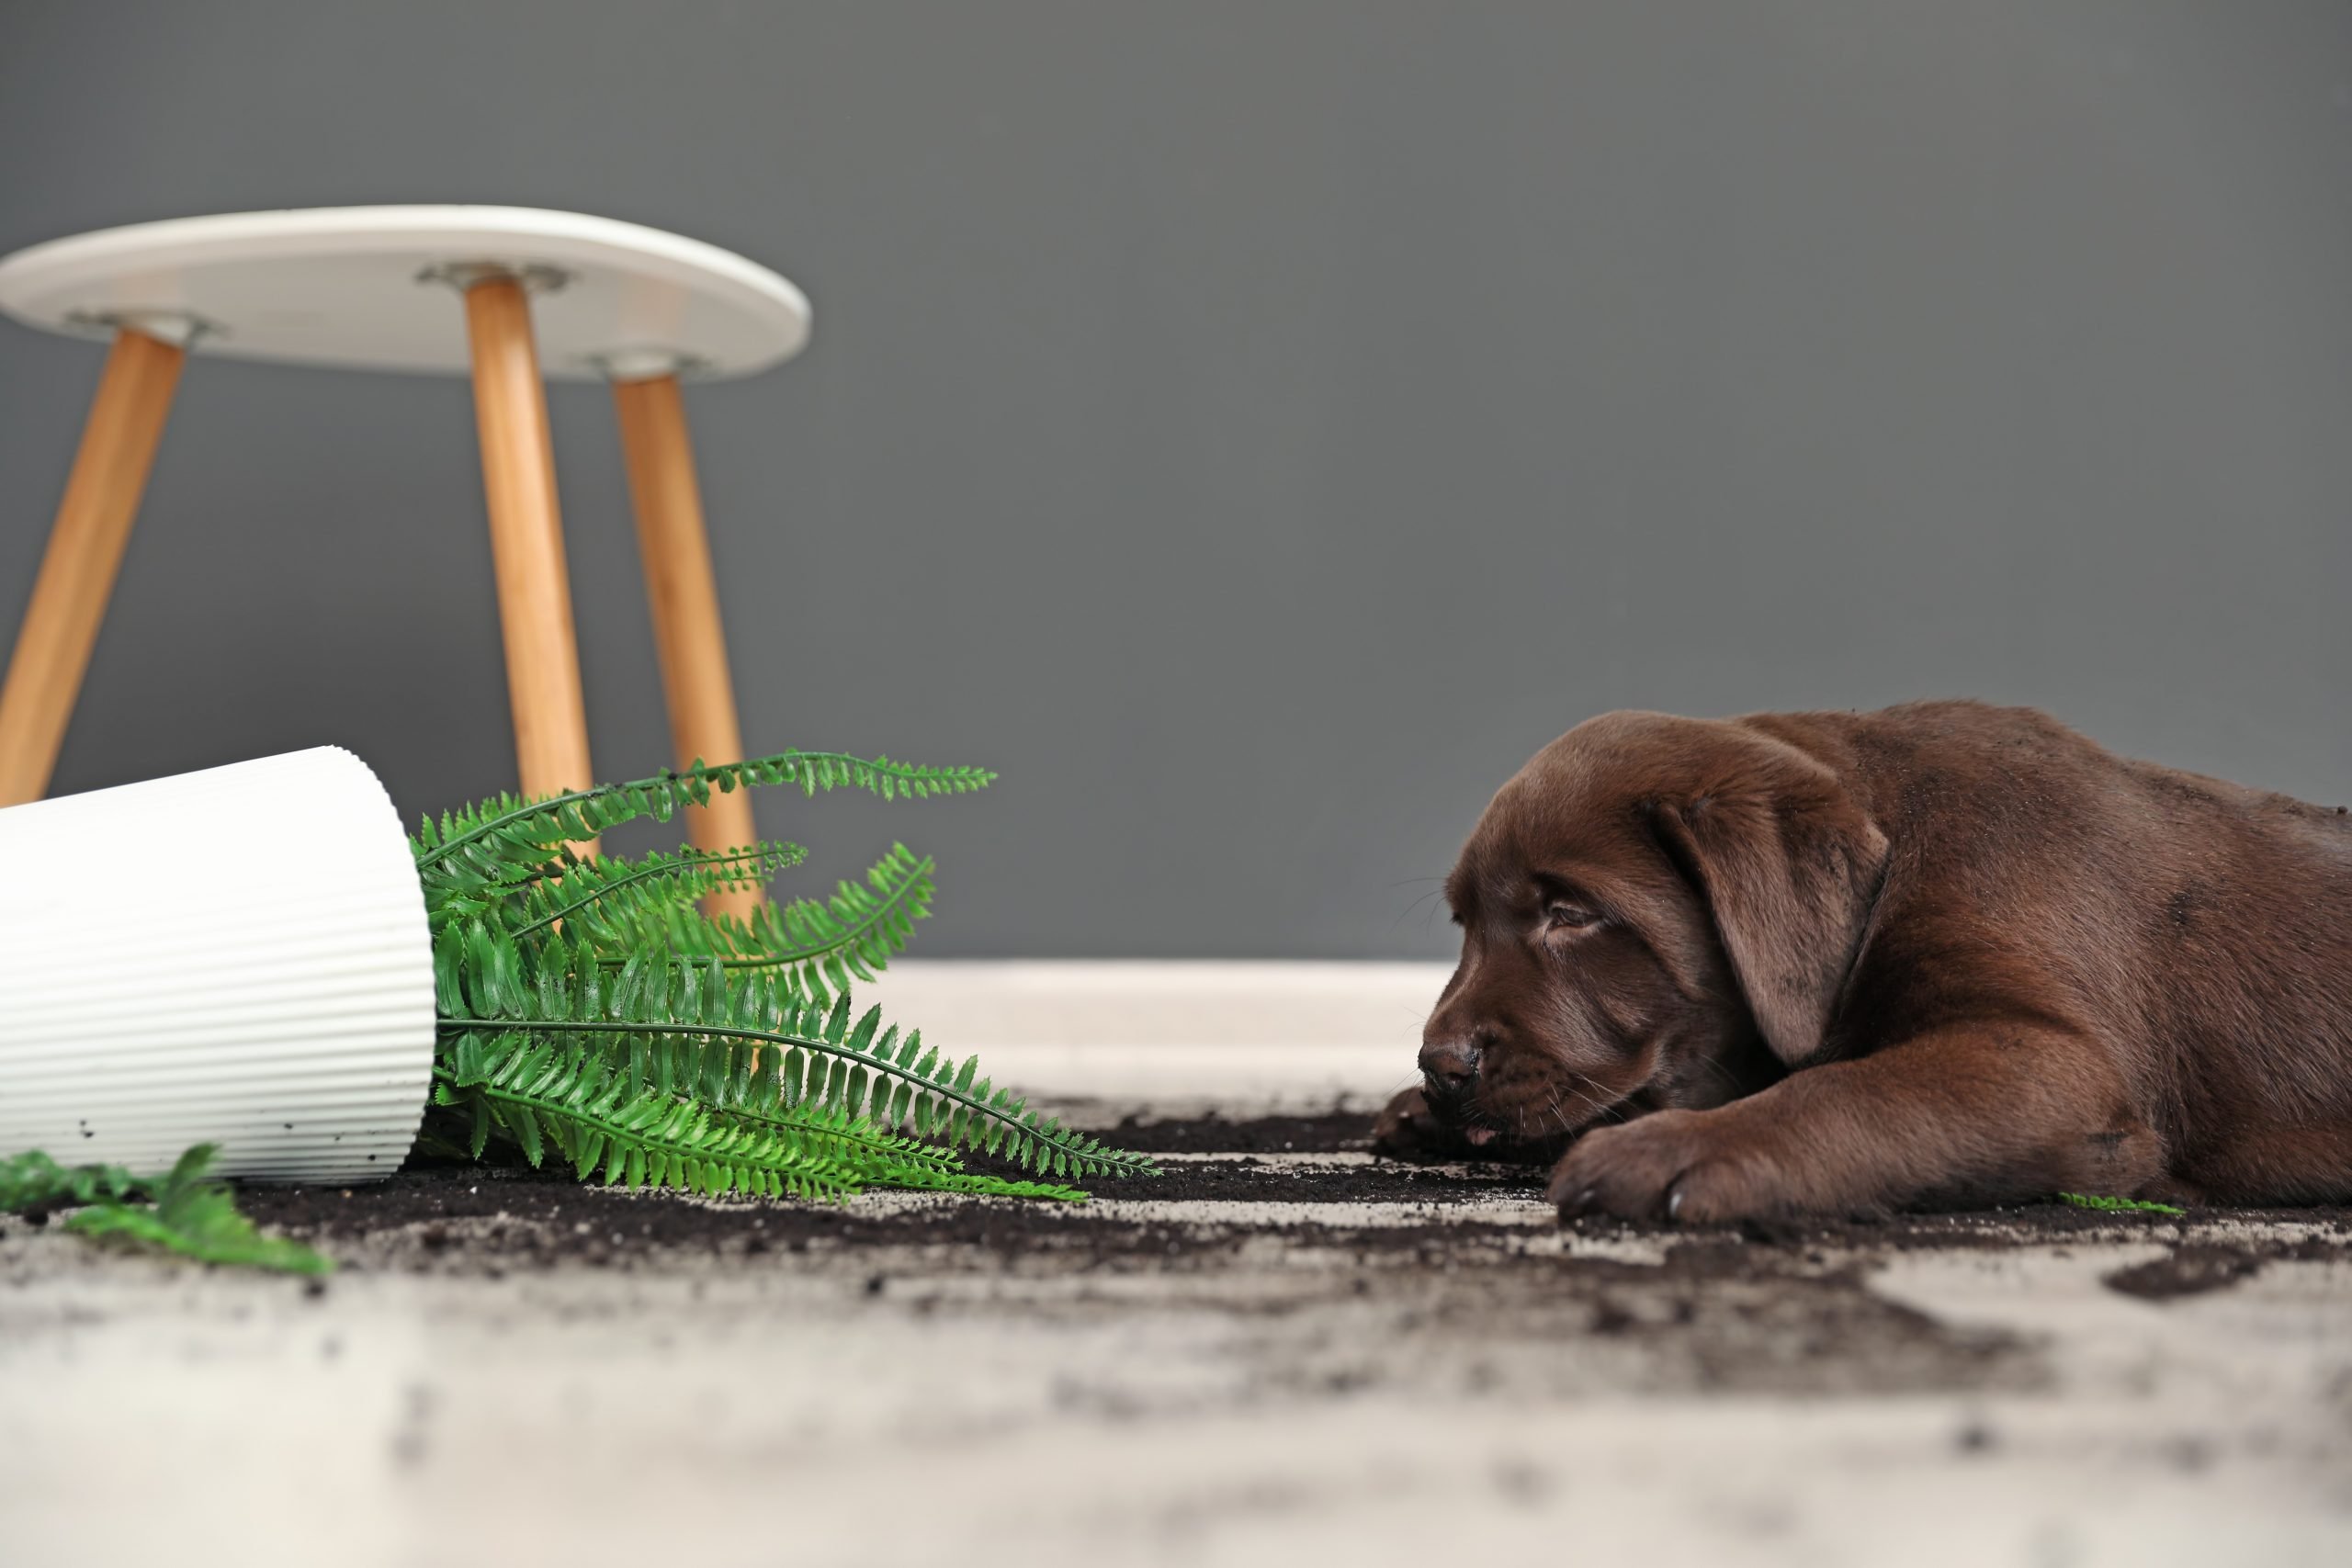 Why Do Dogs Eat Dirt? | Reader's Digest